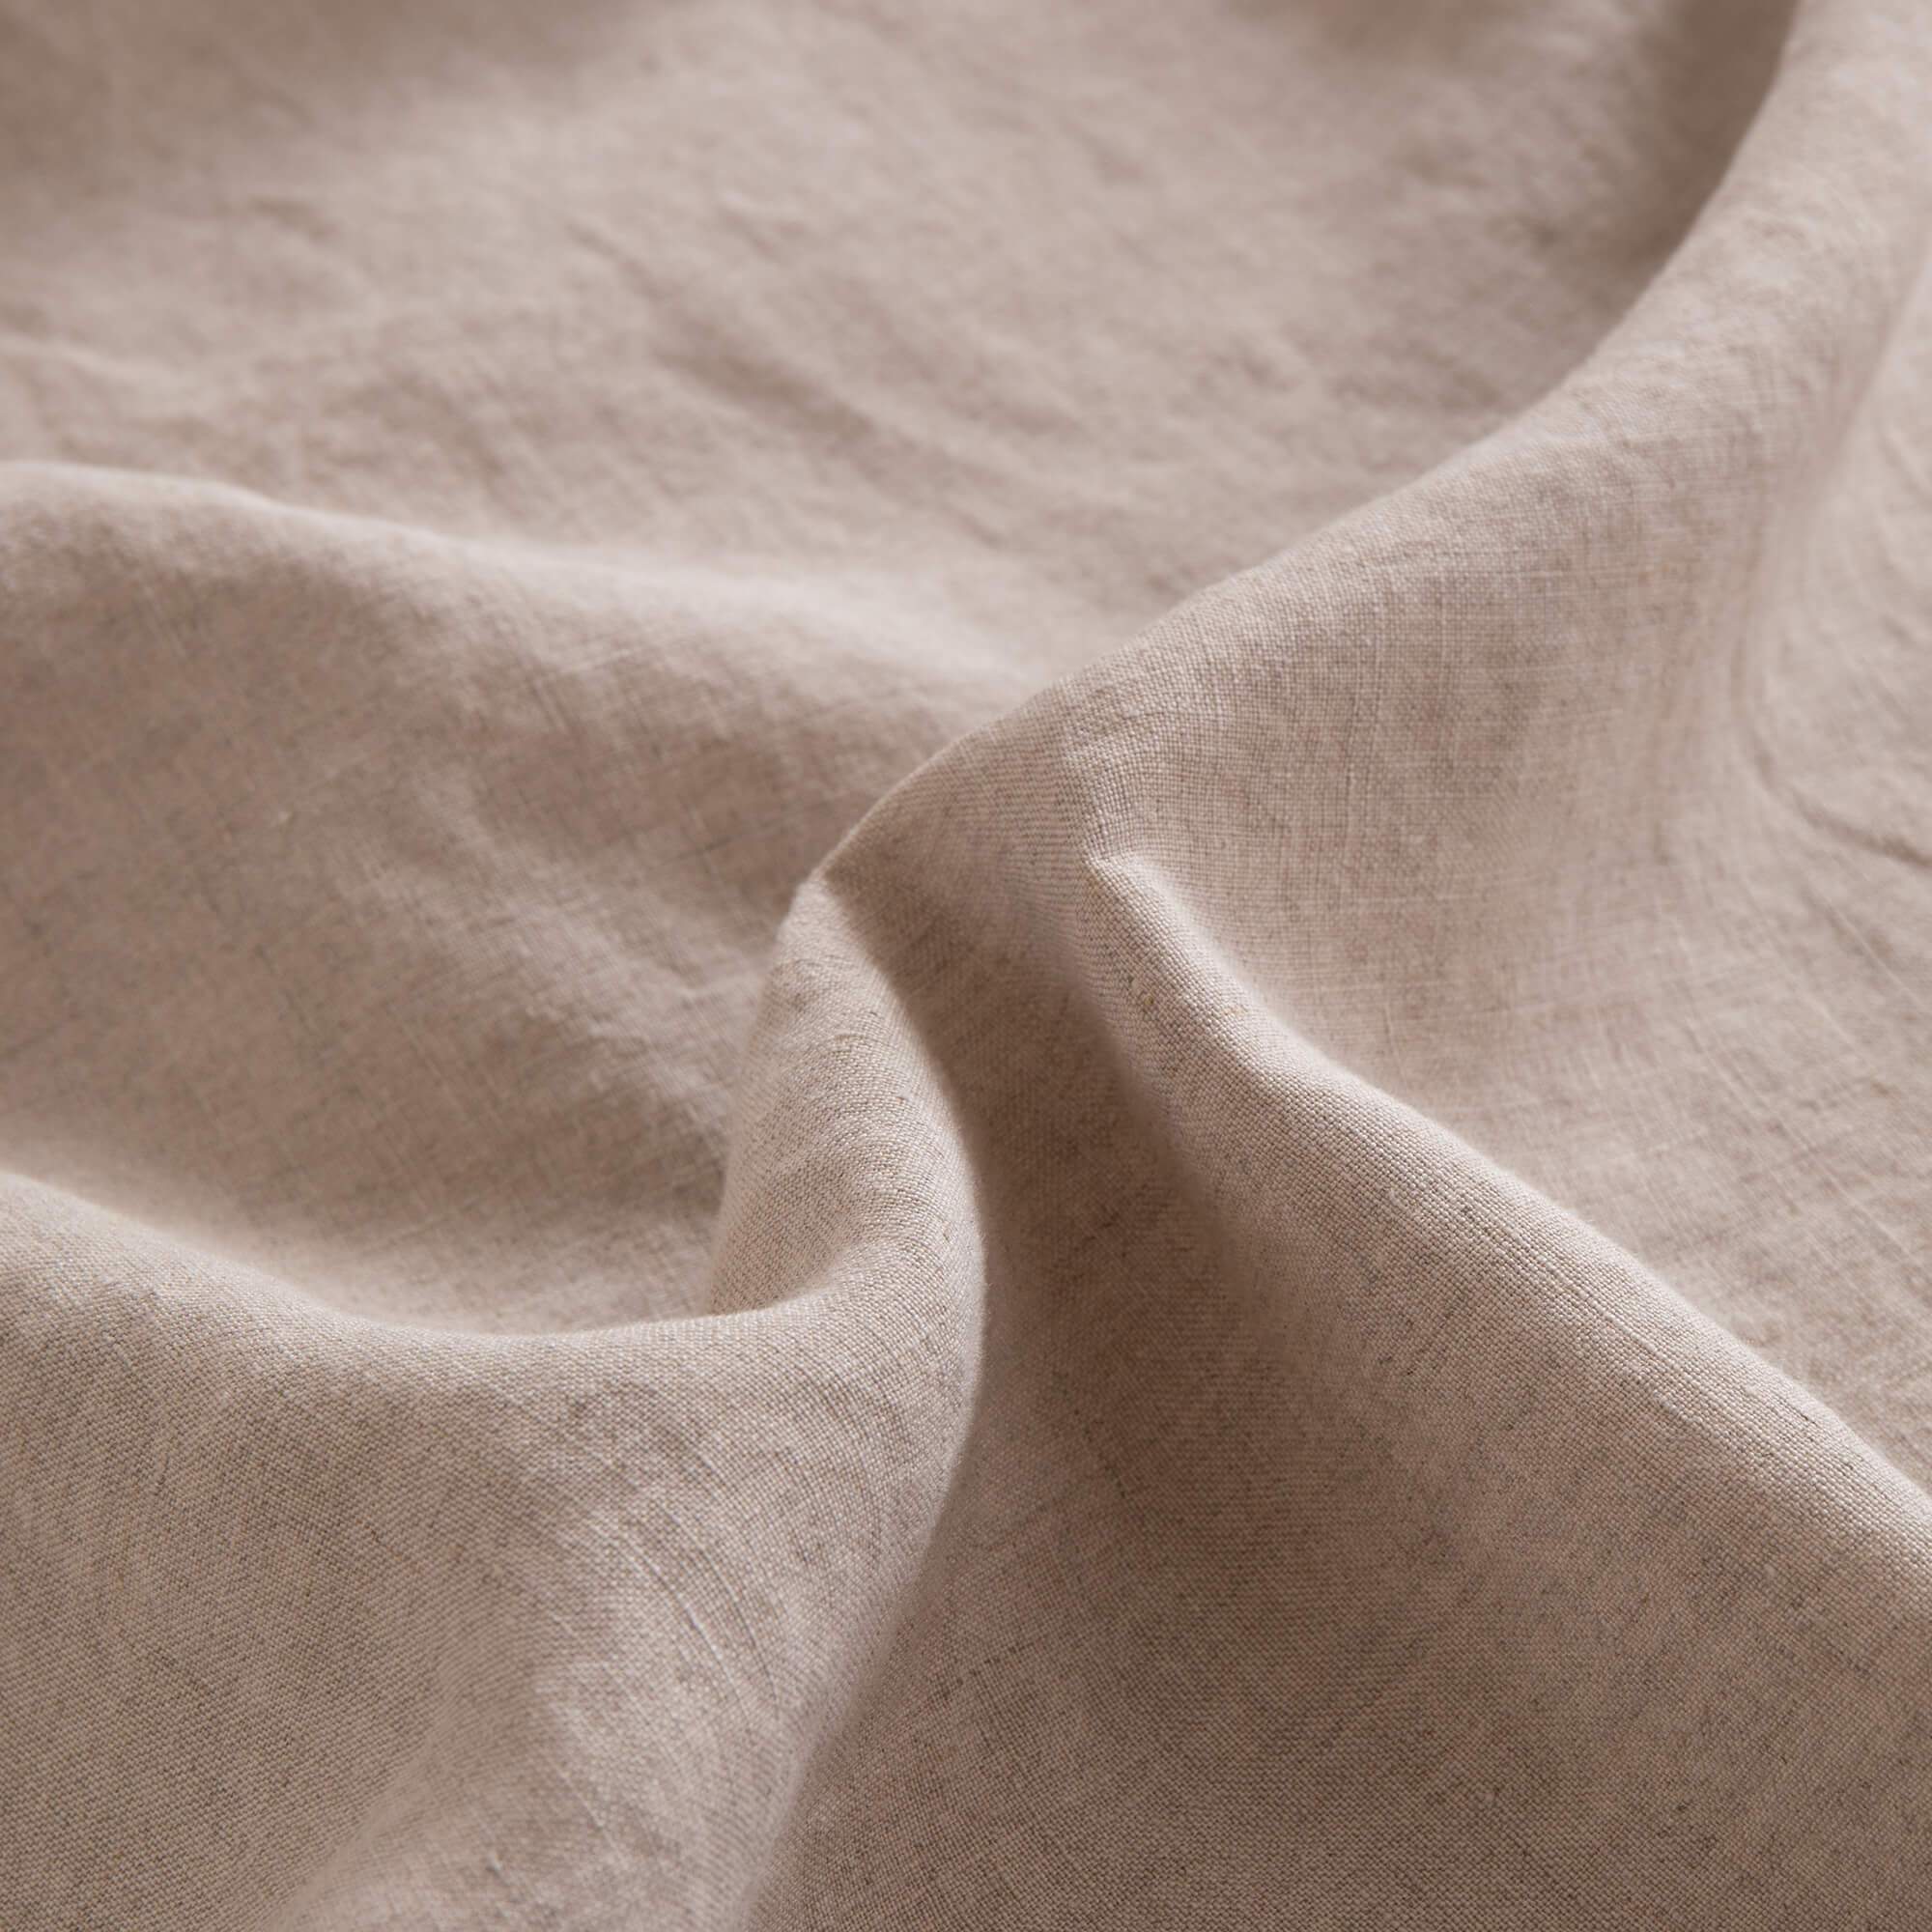 Sustainable Pure French Linen Sheet Sets